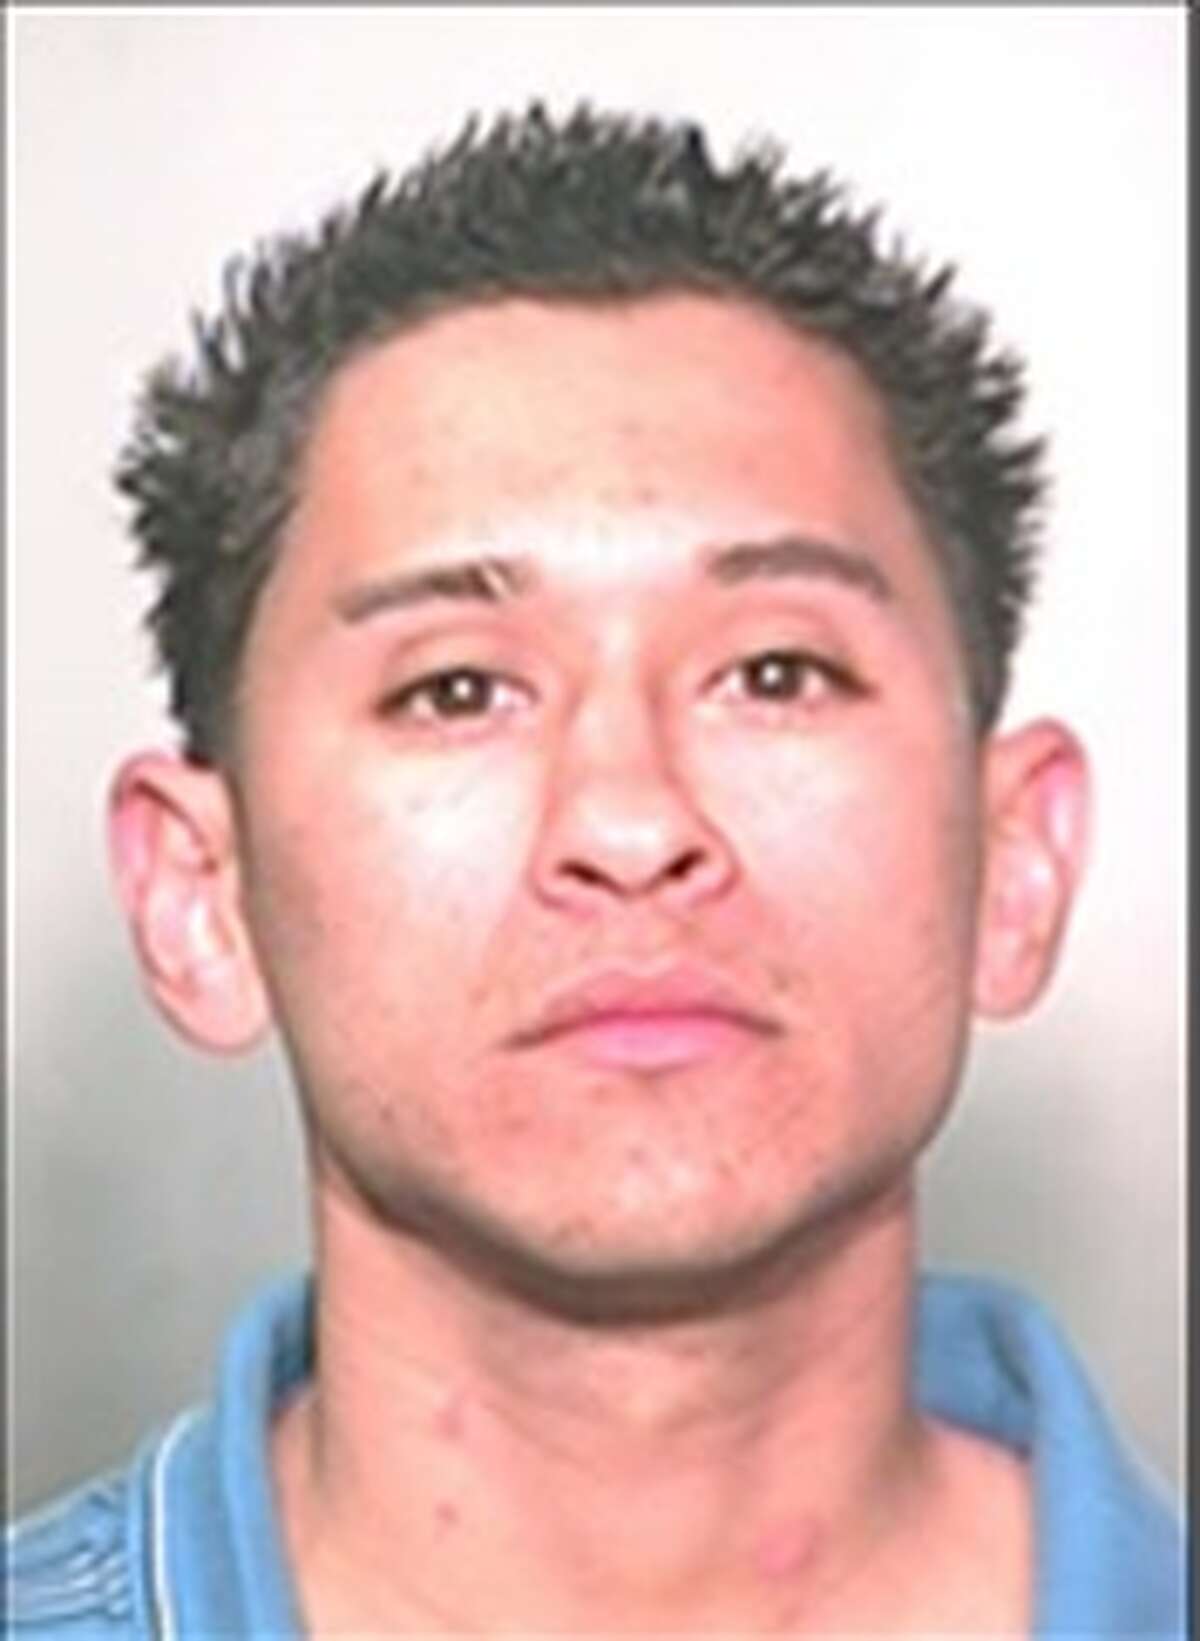 Freddie Alaniz, seen here in 2006, is wanted for murder, sexual assault of a child and possession of marijuana.